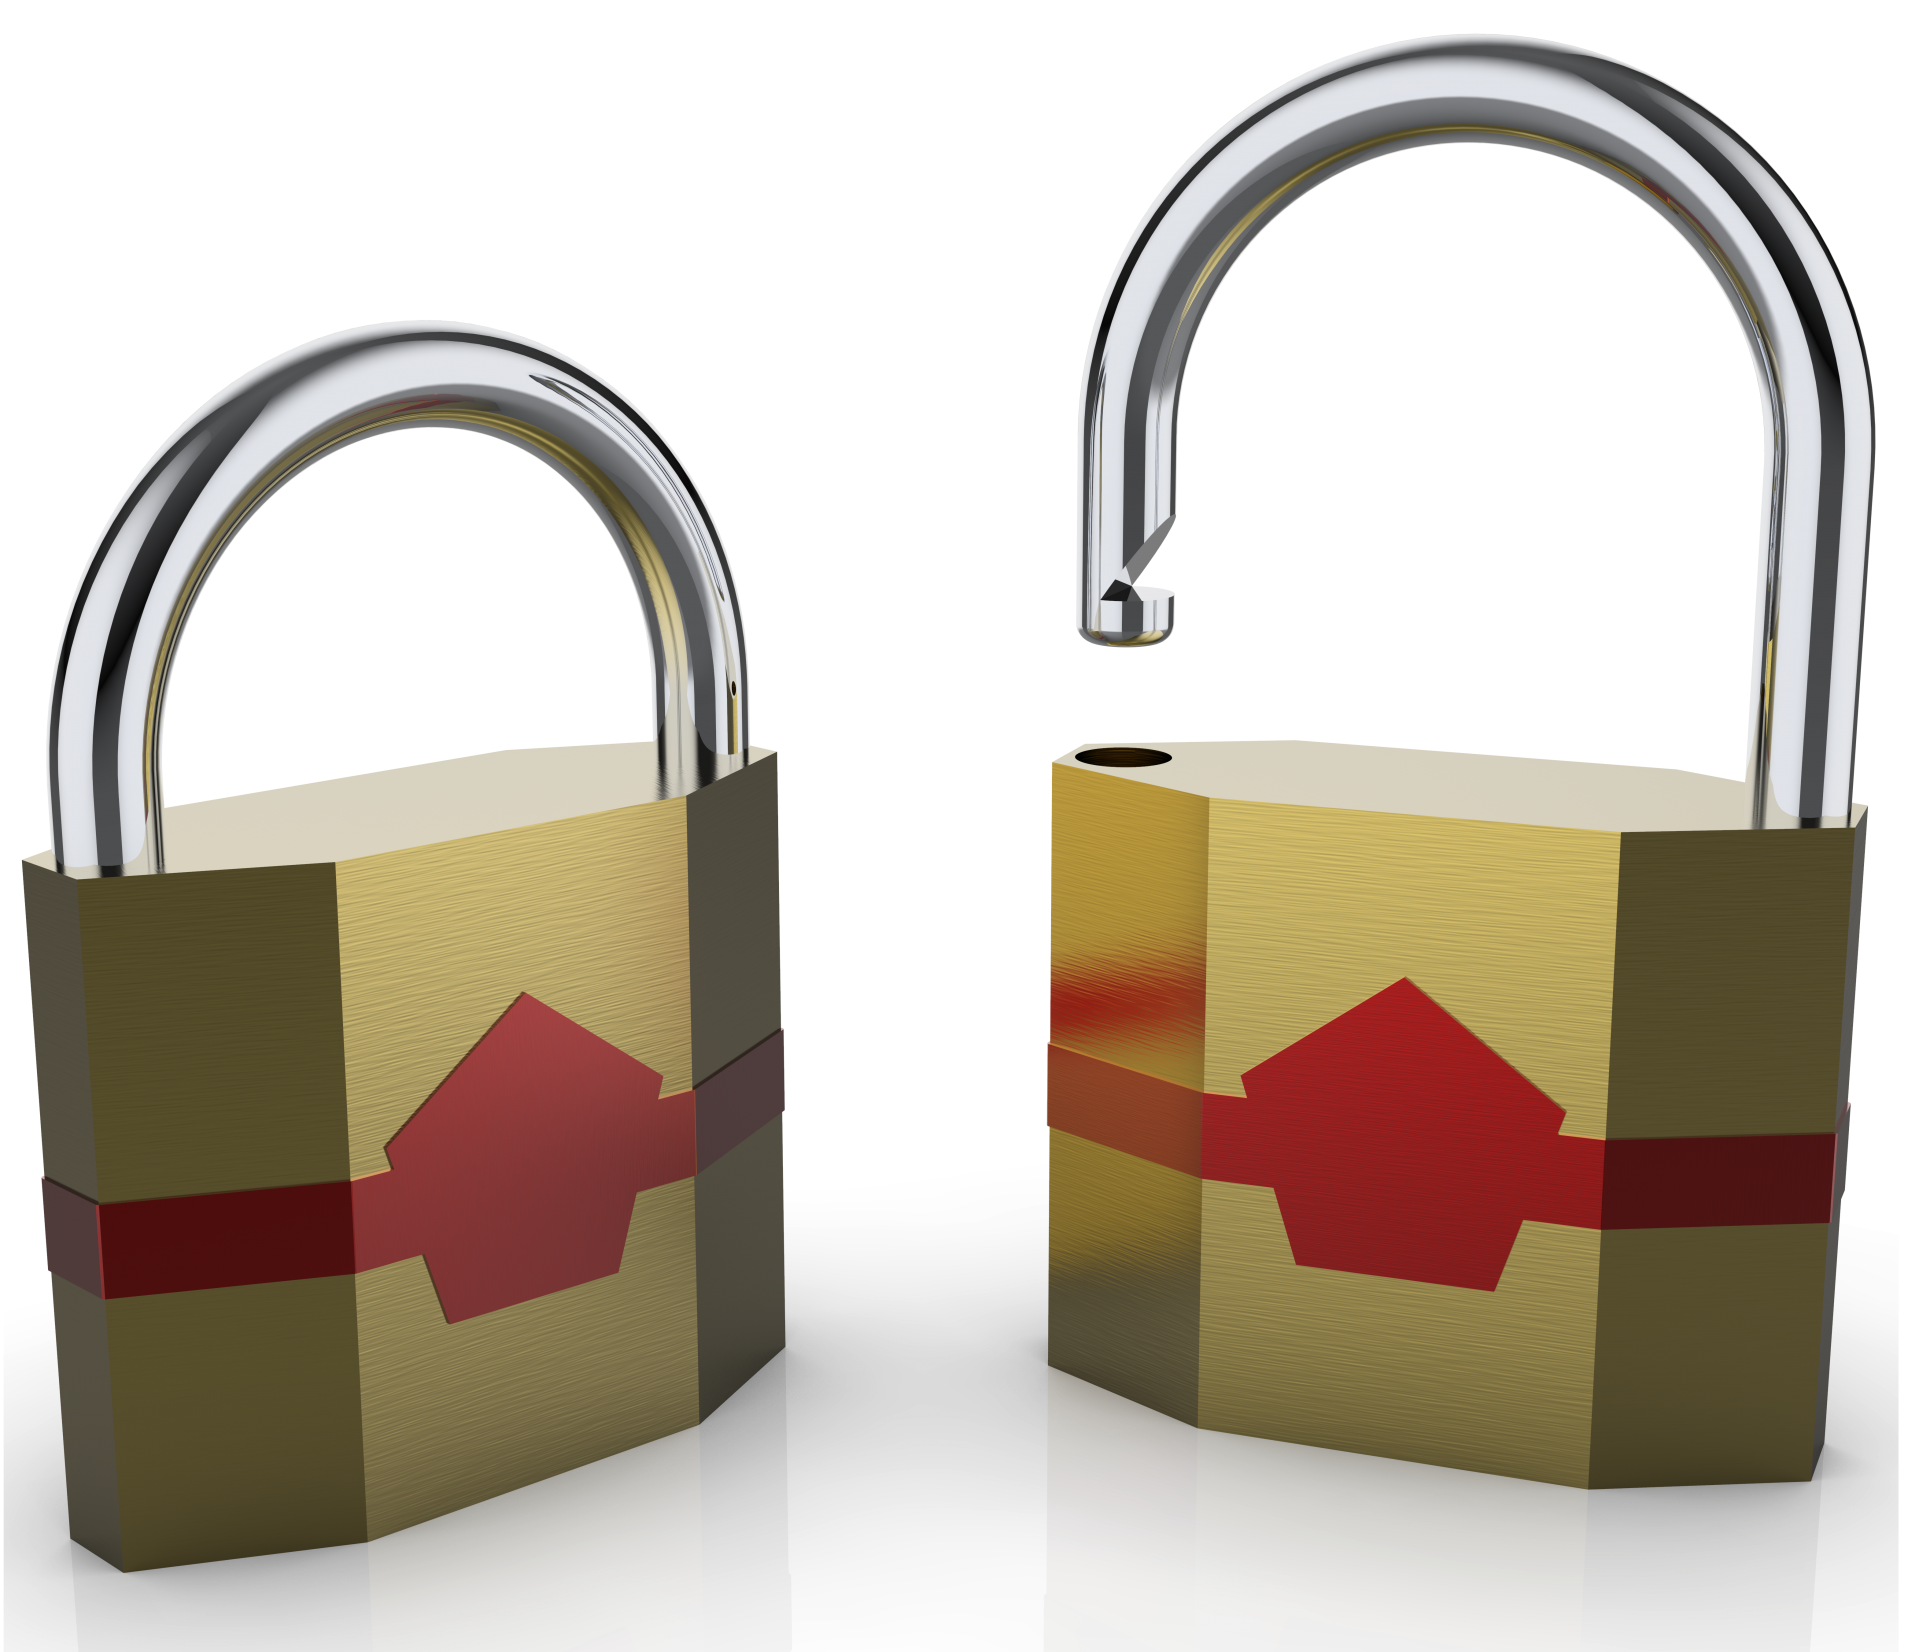 Padlock Open And Closed